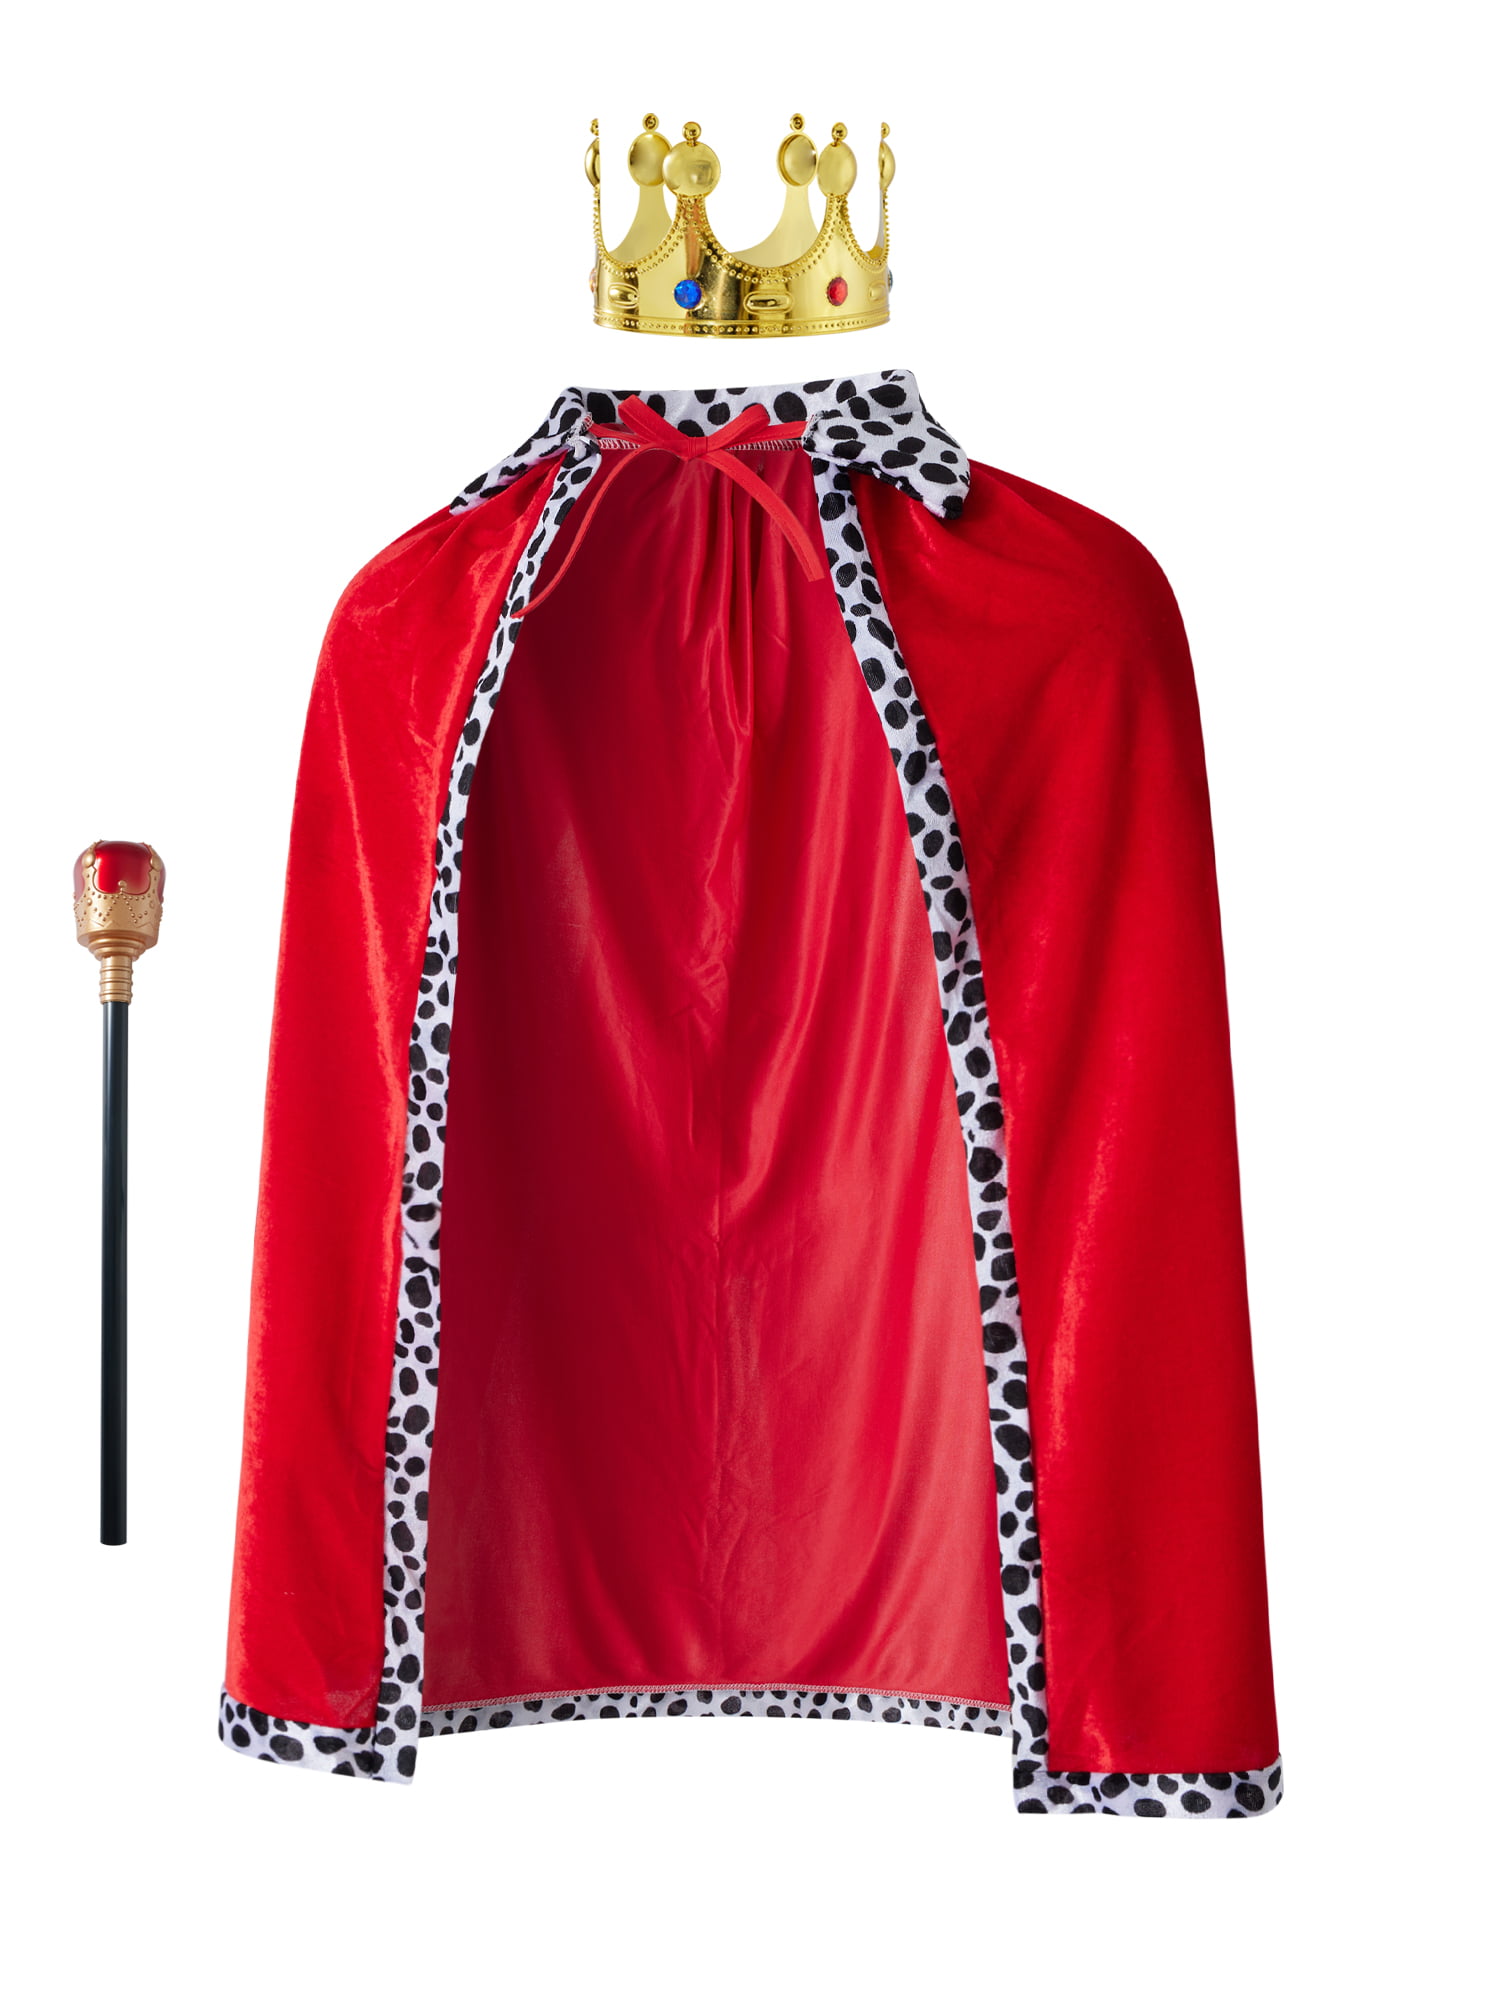 SATINIOR King Robe Queen Robe Cosplay Costume Stage Performances for Halloween Costume Party Accessory Red Robe Adult Size 